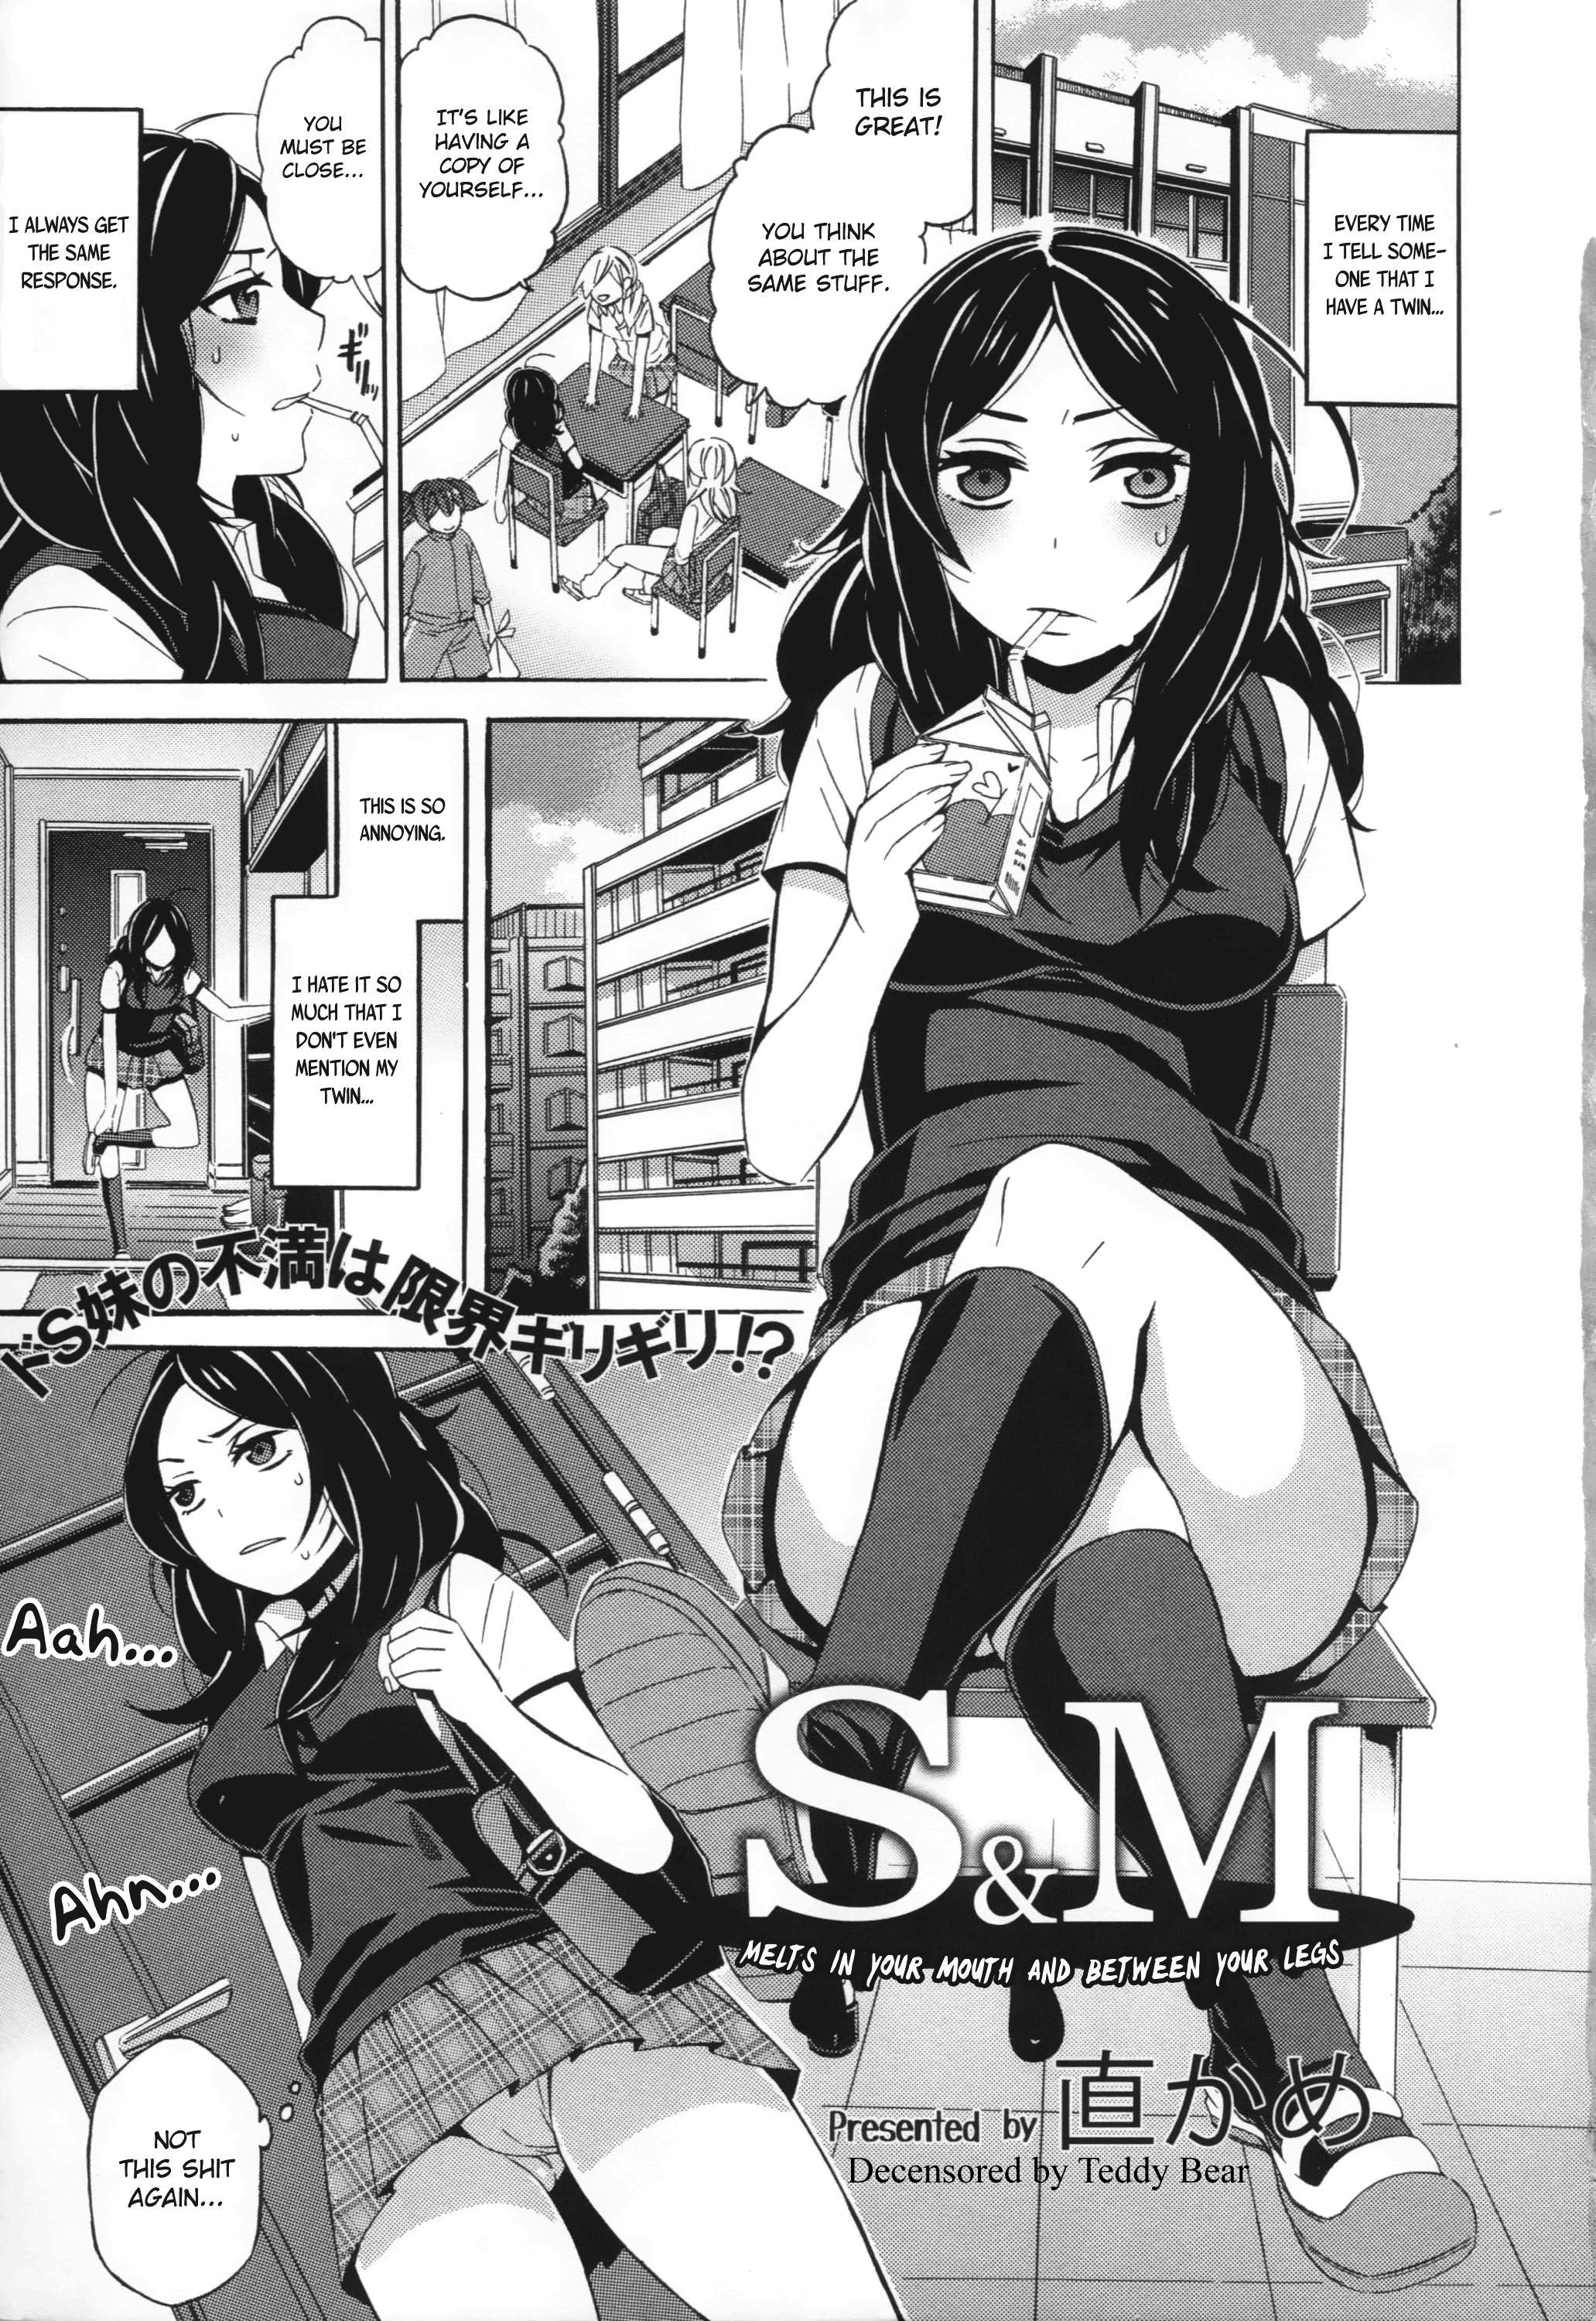 Naokame S&M ~Melts in Your Mouth and Between Your Legs Hentai Comics